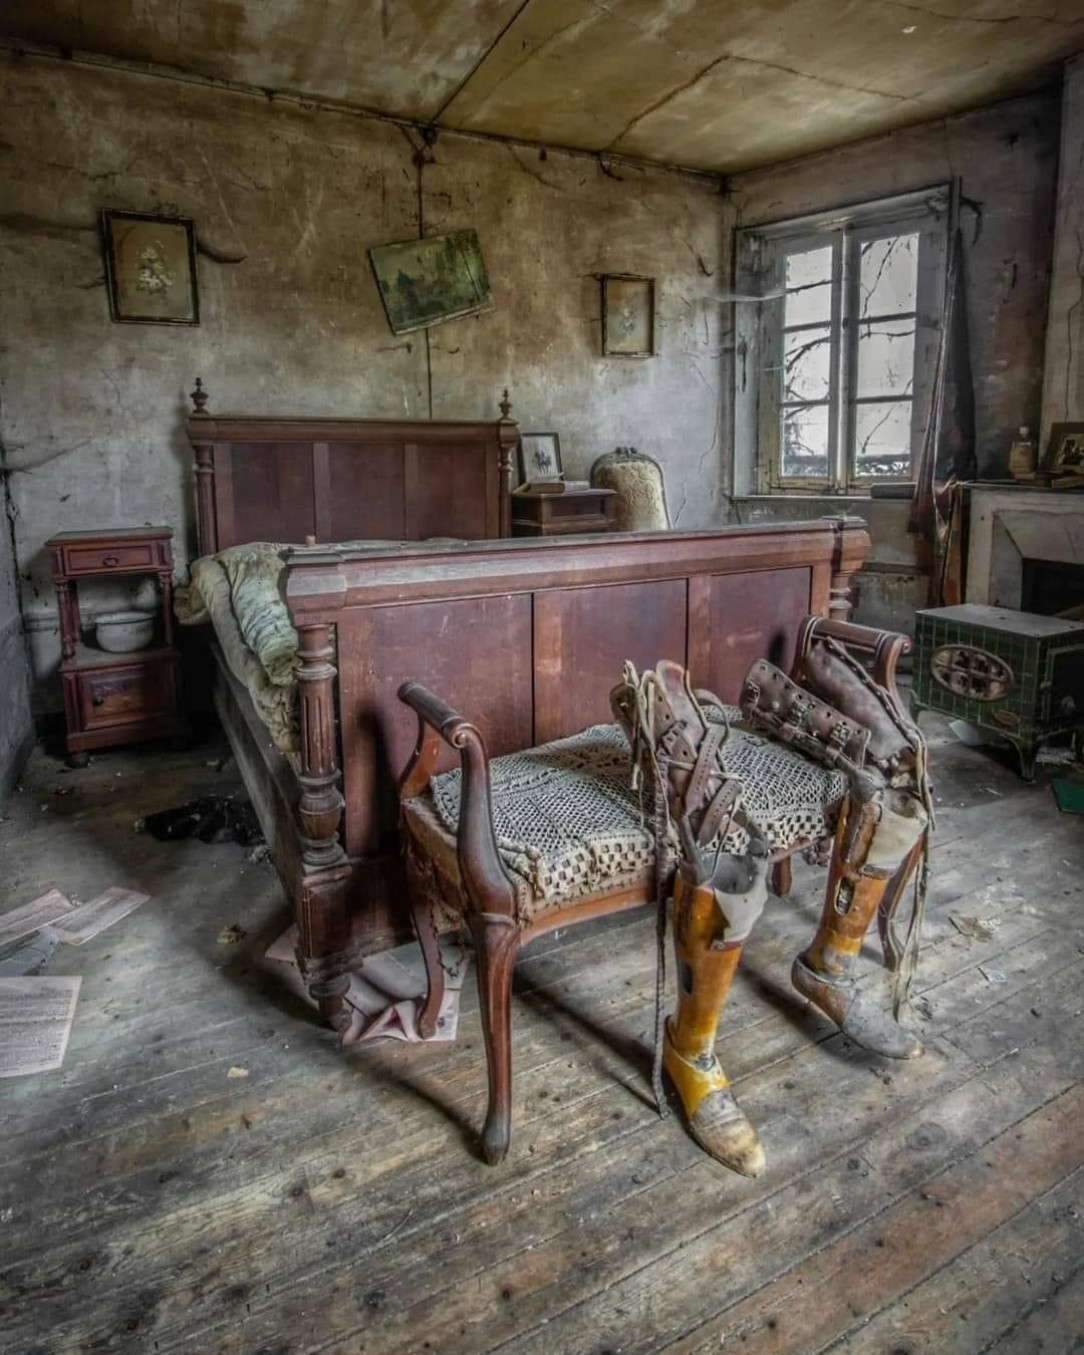 An abandoned house in France